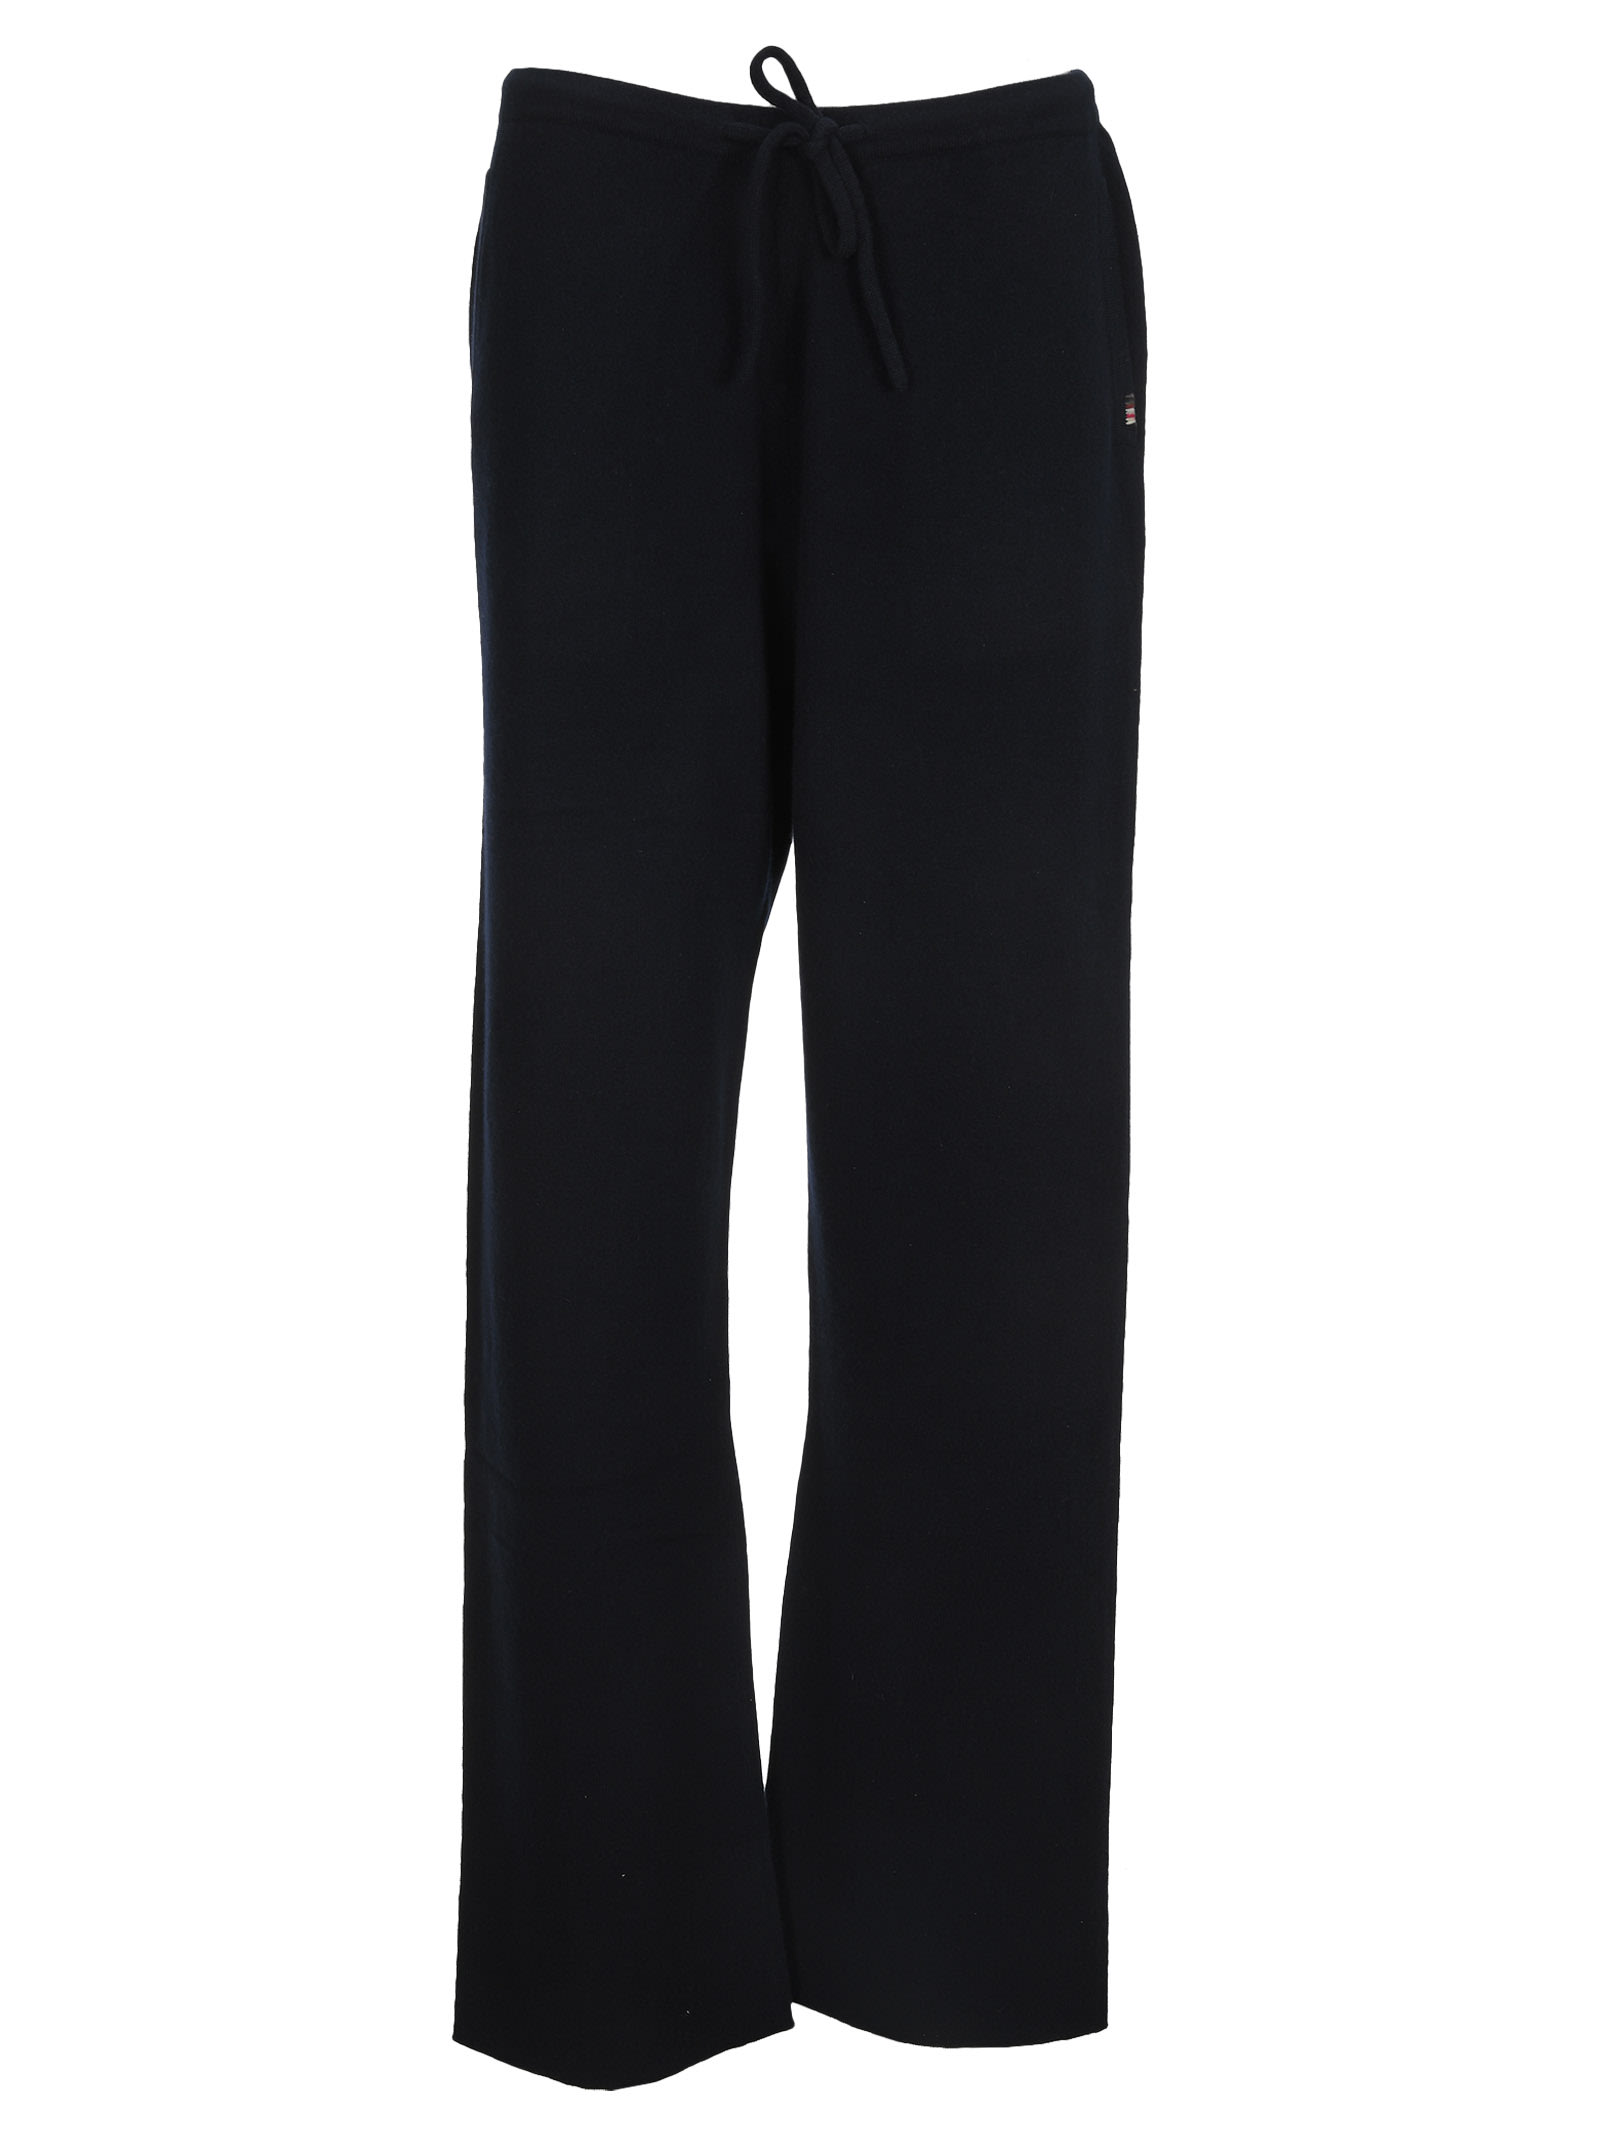 Extreme Cashmere N°142 Run Pants